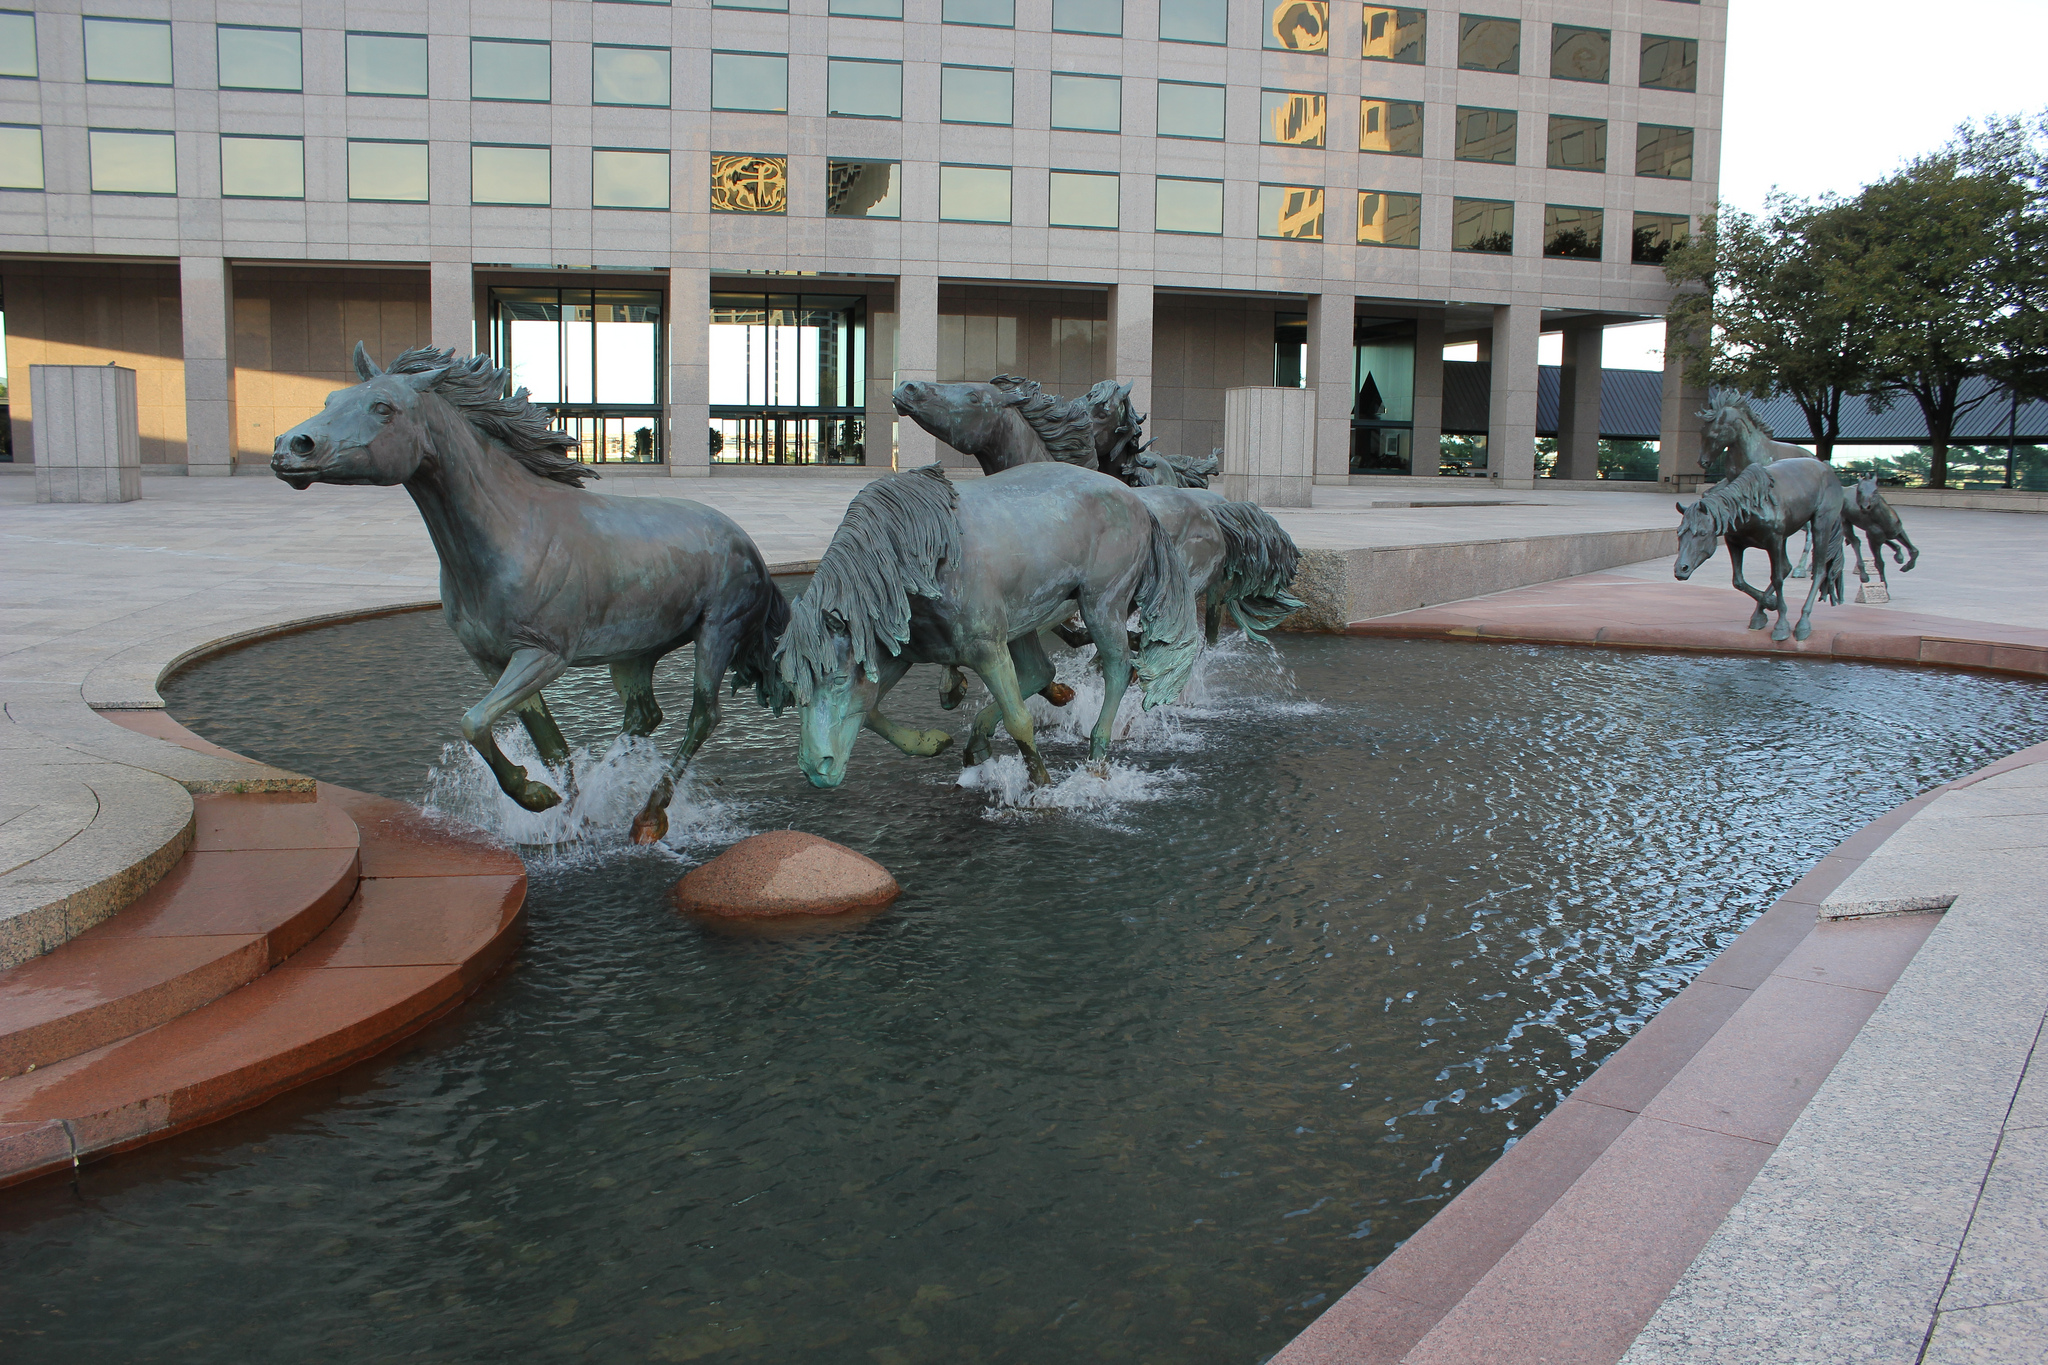 Wondering What to Do in Texas? Irving has this neat statue ... photo by CC user texasbackroads on Flickr